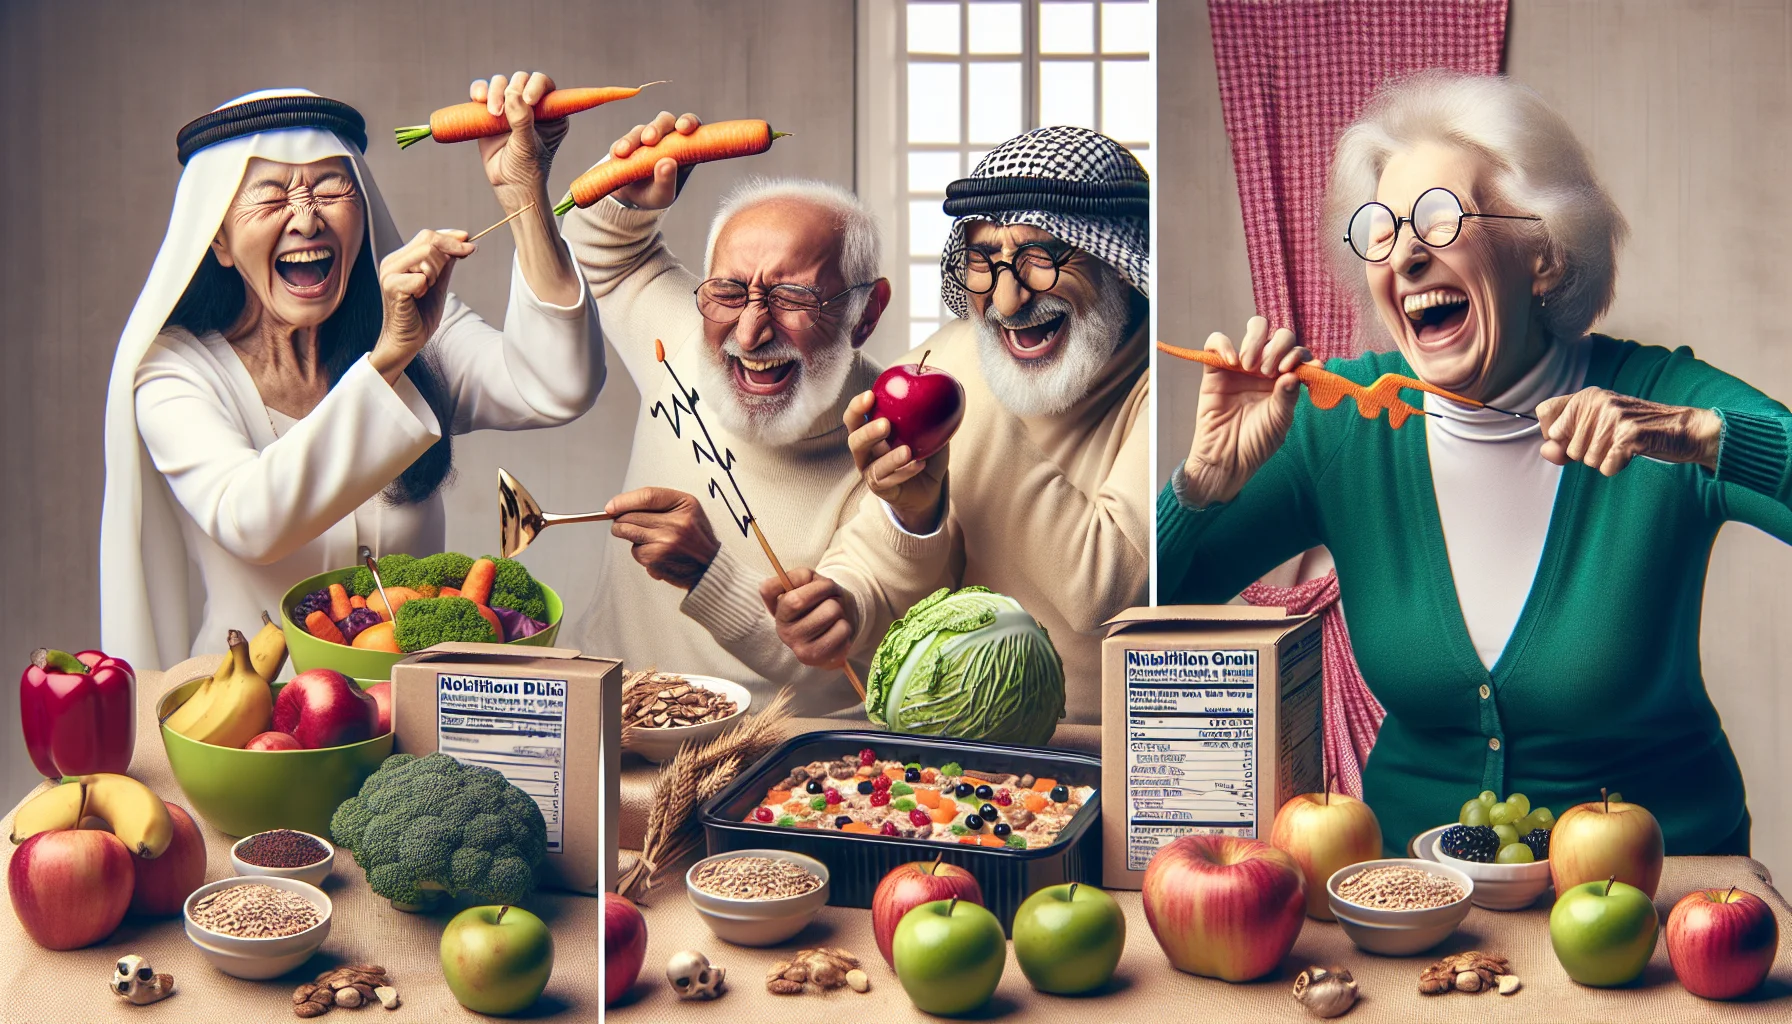 In a humorous setting, picture a table set with heart-healthy meal kits, which include elements like colorful varieties of fruits, veggies, lean proteins, and whole grains. Close by, there are three elderly persons engaged in varied amusing activities related to diet and healthy eating: A Middle-Eastern woman, laughing and playfully brandishing a carrot stick as if it's a conductor's baton; an Asian man, wearing his reading glasses low on the nose, squinting to read the nutritional information on a whole grain cereal box; and a Caucasian lady, merrily stuffing a whole apple in her mouth, eyes twinkling with mischief.